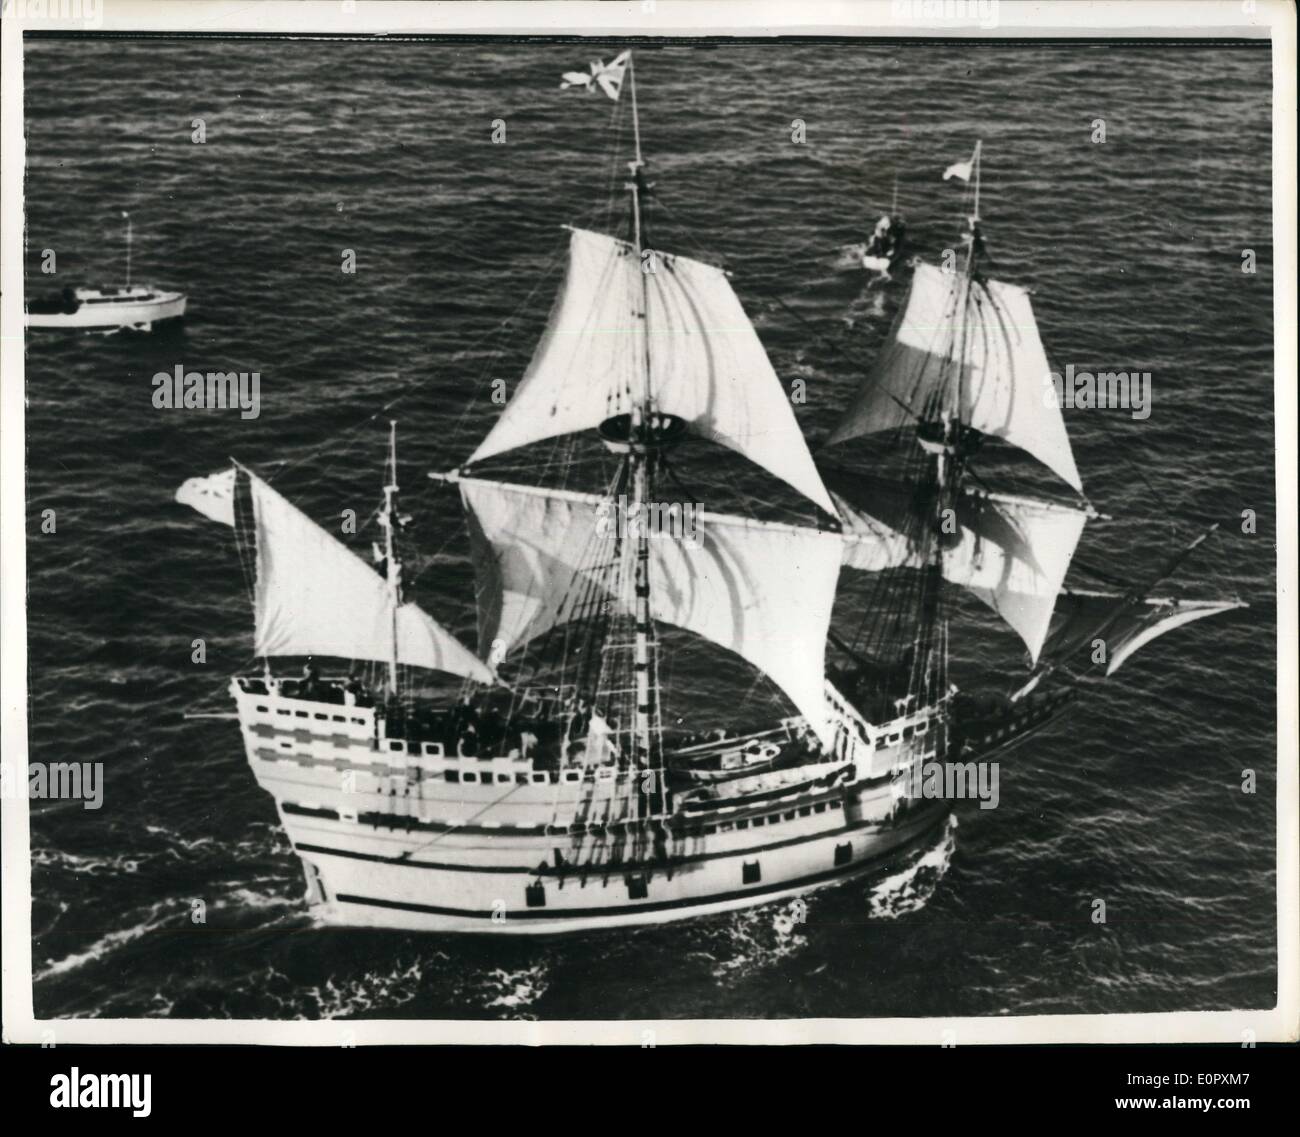 Apr. 17, 1957 - The ''Mayflower II'' under sail at last: The Mayflower II traveled under full sail for the first time yesterday Stock Photo